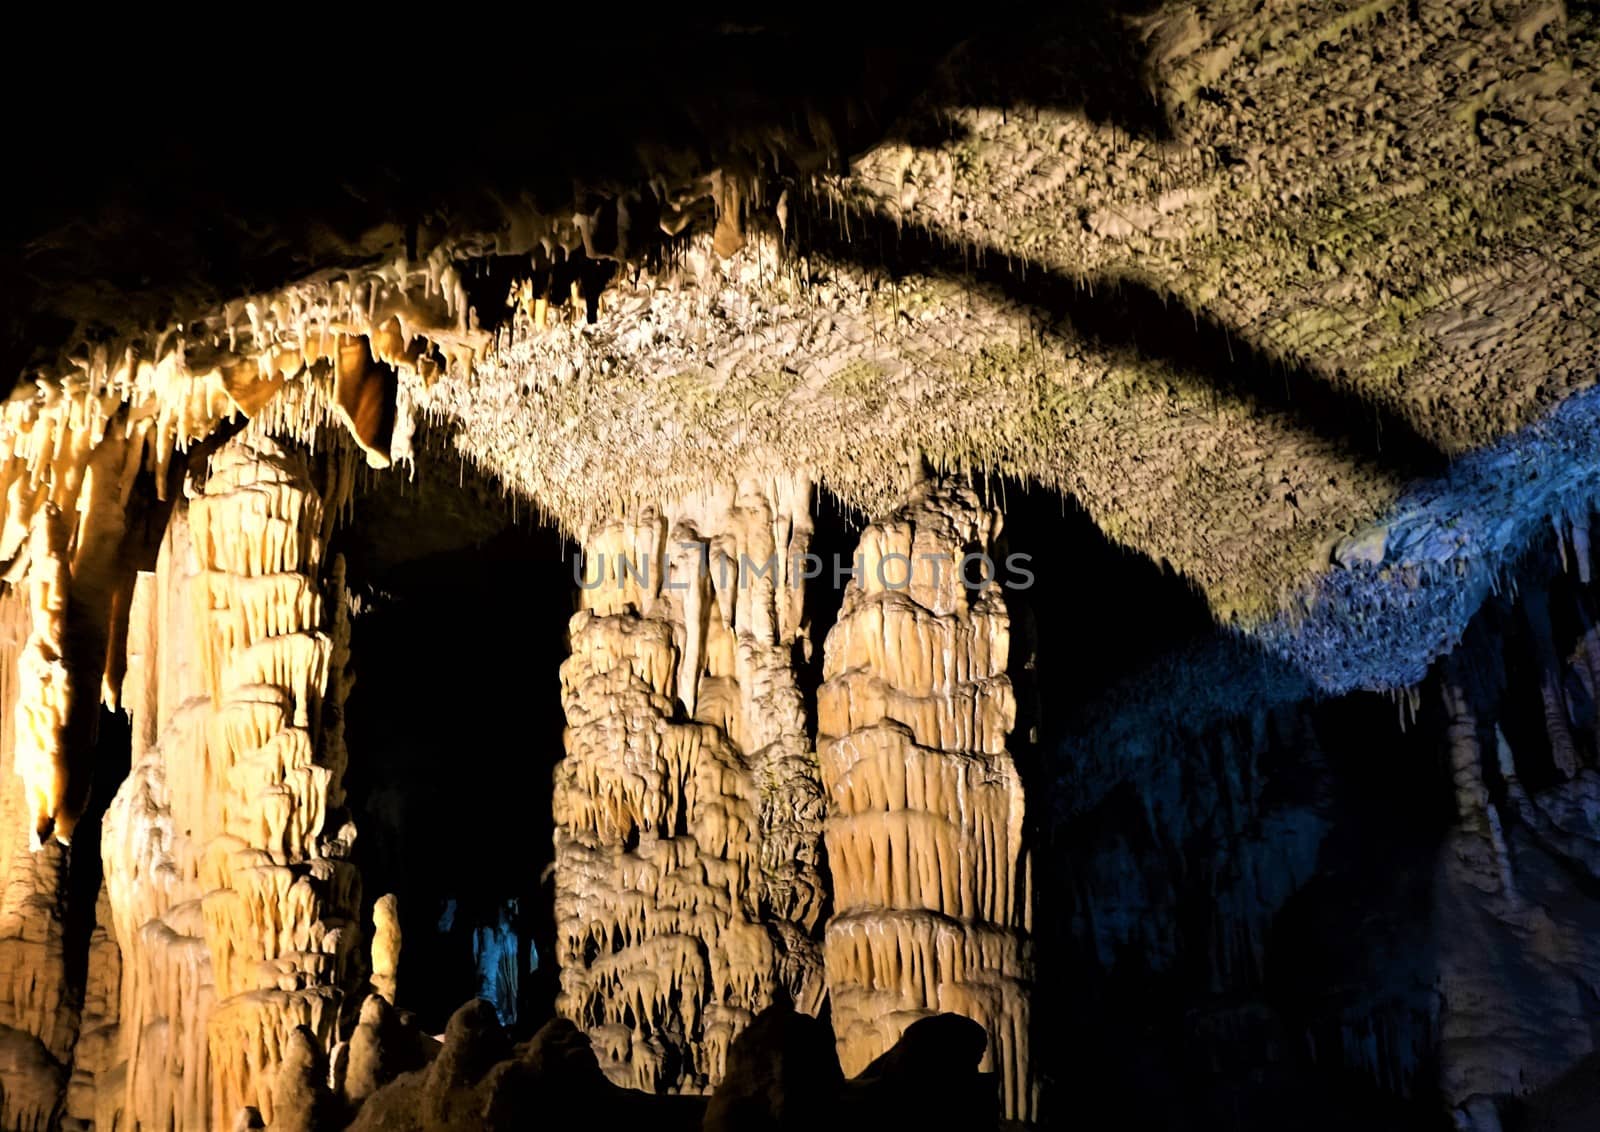 Dripstone columns in the spaghetti room of the Postojna caves by pisces2386